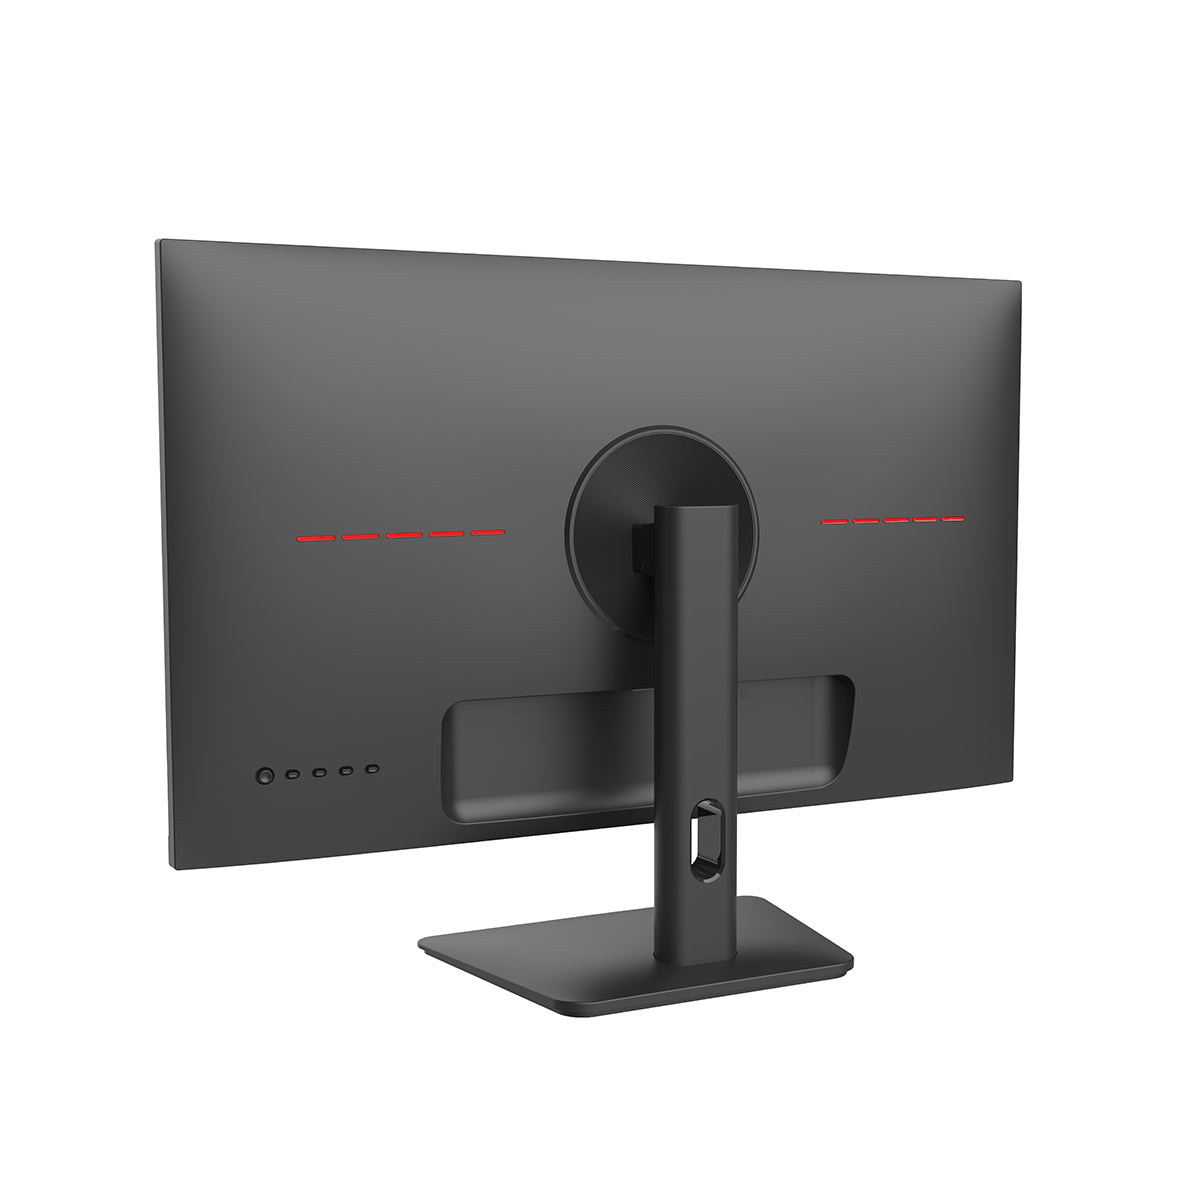 24 inch IPS Minifire Gaming Monitor is VESA compatible and support HDMI and DP ports